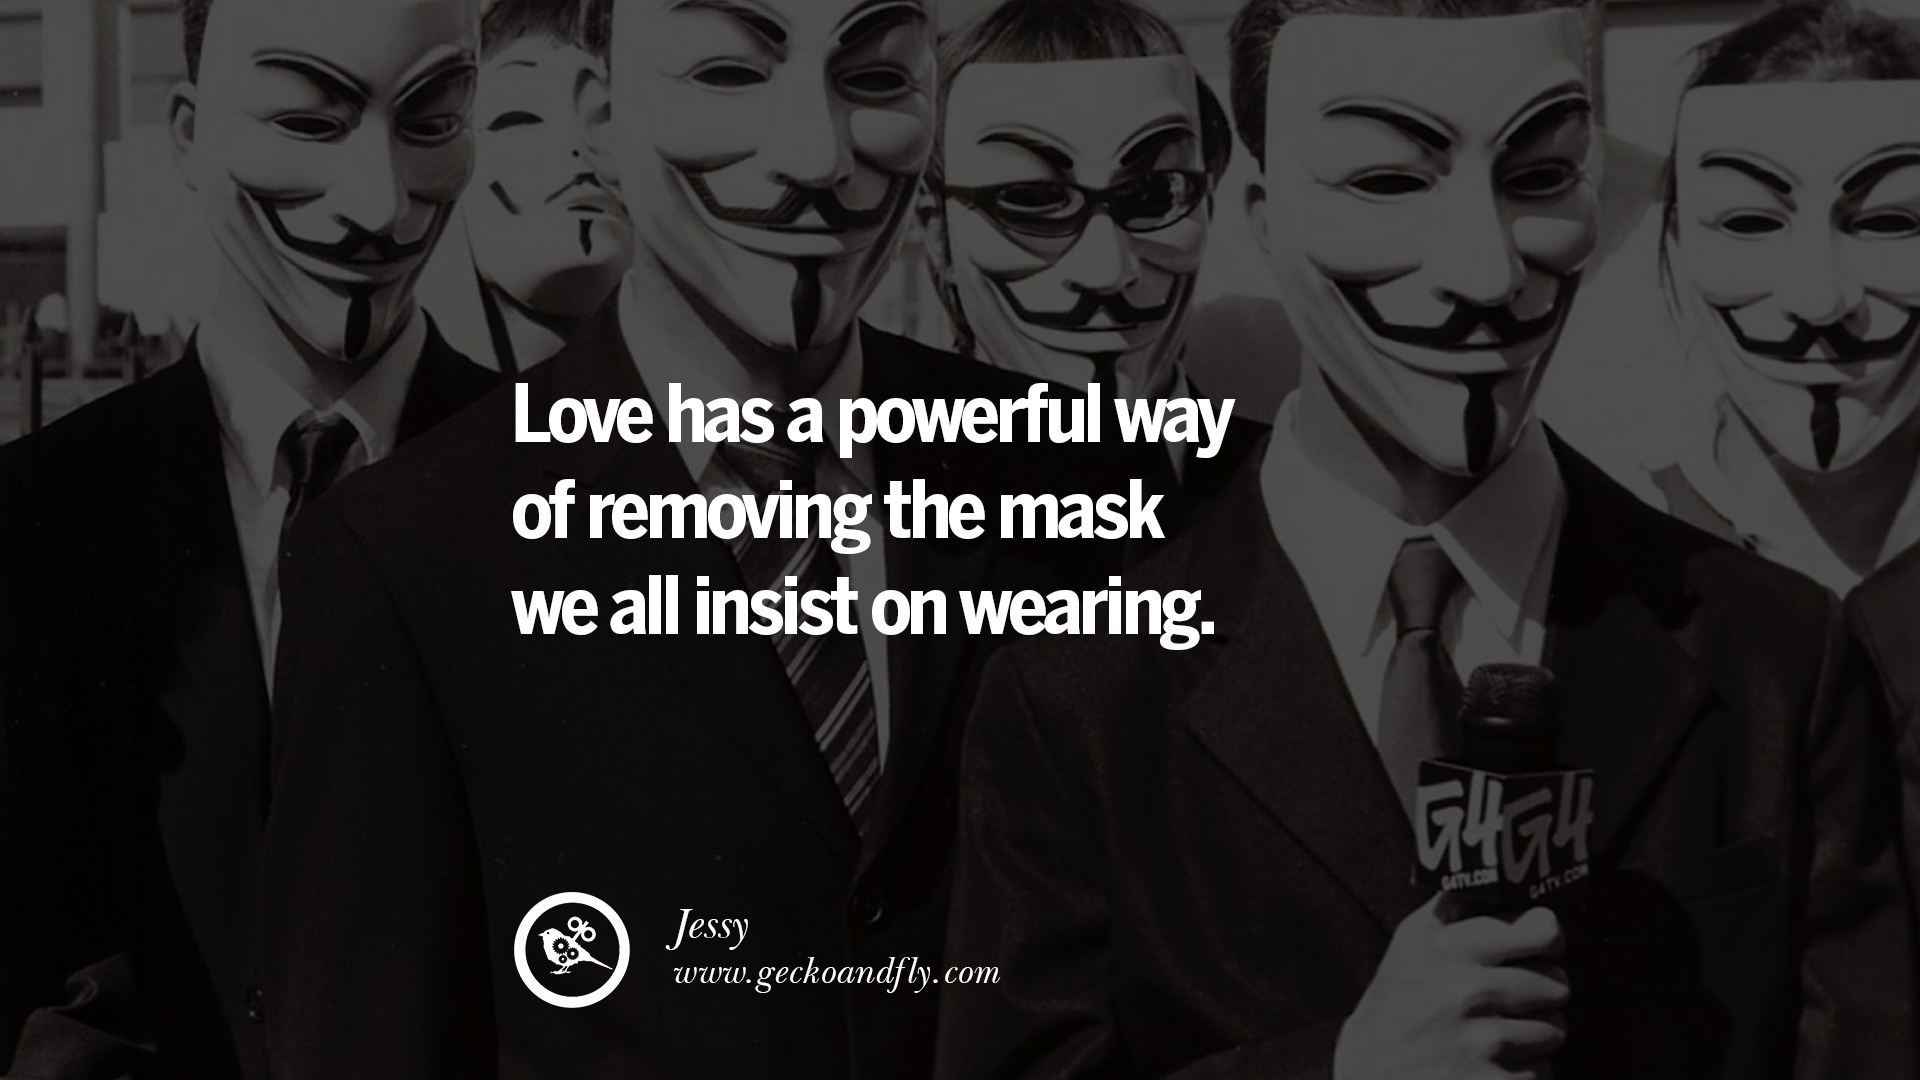 Love has a powerful way of removing the mask we all insist on wearing